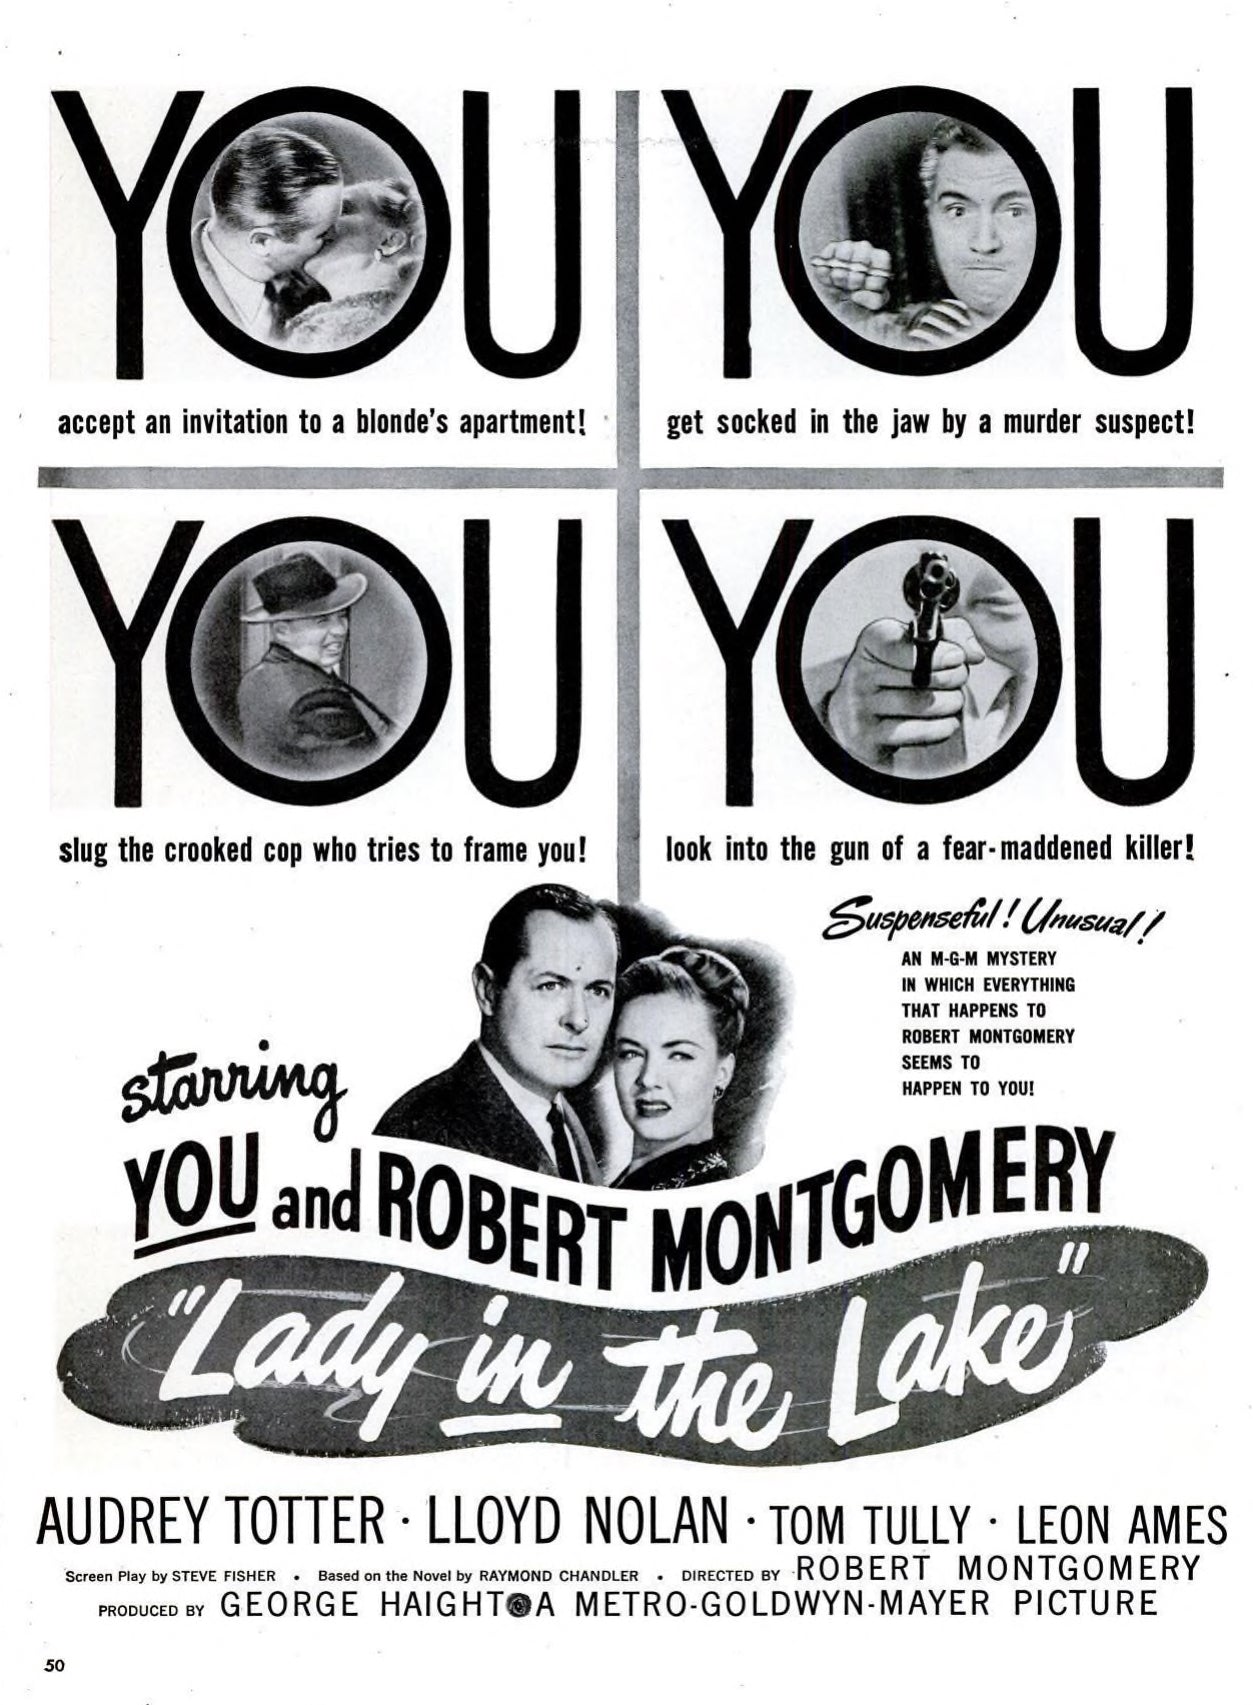 Lady in the Lake (1946) | www.vintoz.com